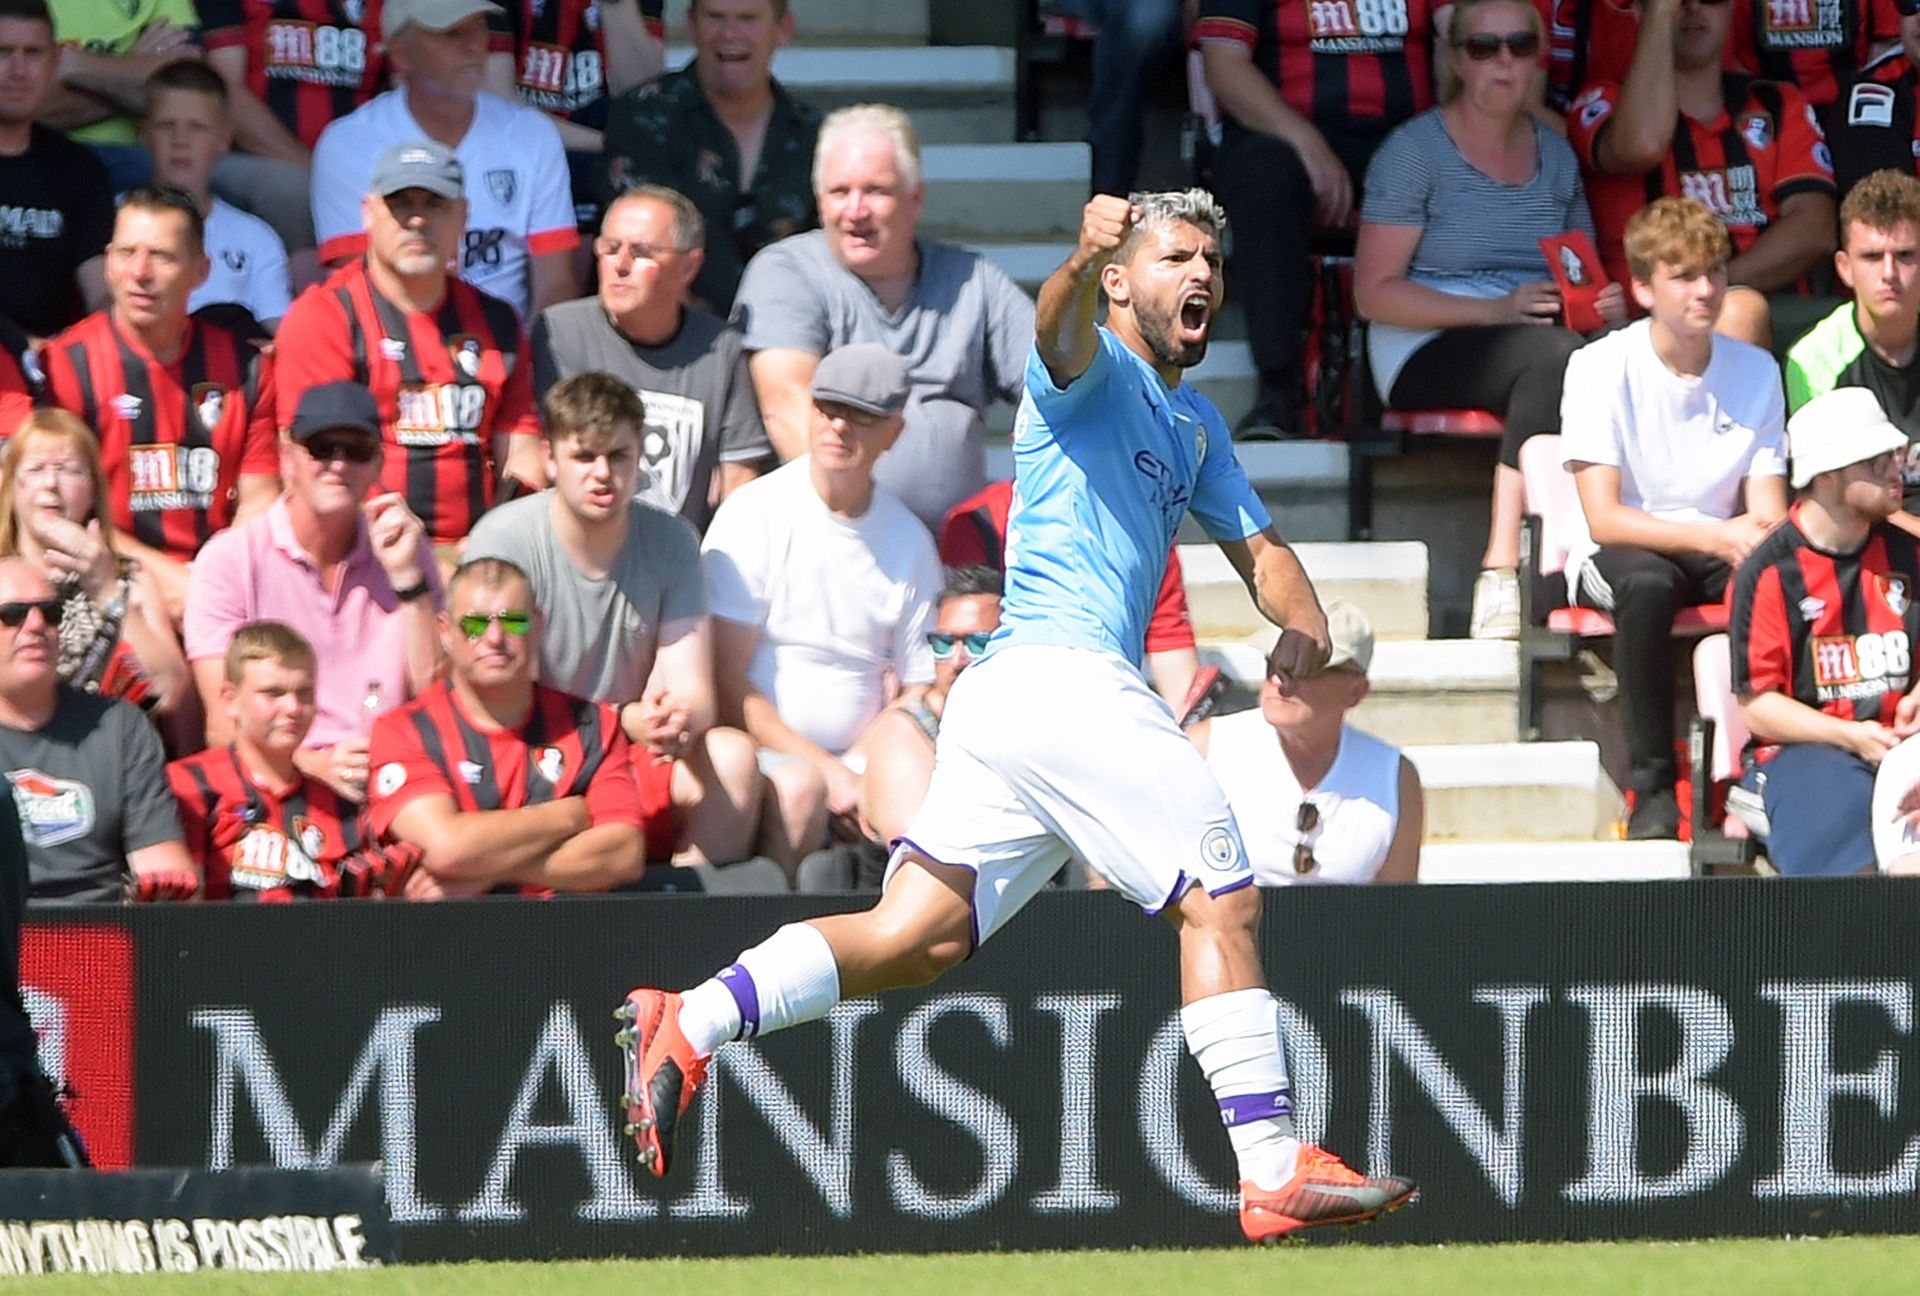 epa07792888 Manchester City's Sergio Aguero celebrates after scoring the opening goal during the English Premier League soccer match between AFC Bournemouth and Manchester City in Bournemouth, Britain, 25 August 2019.  EPA/GERRY PENNY EDITORIAL USE ONLY. No use with unauthorized audio, video, data, fixture lists, club/league logos or 'live' services. Online in-match use limited to 120 images, no video emulation. No use in betting, games or single club/league/player publications